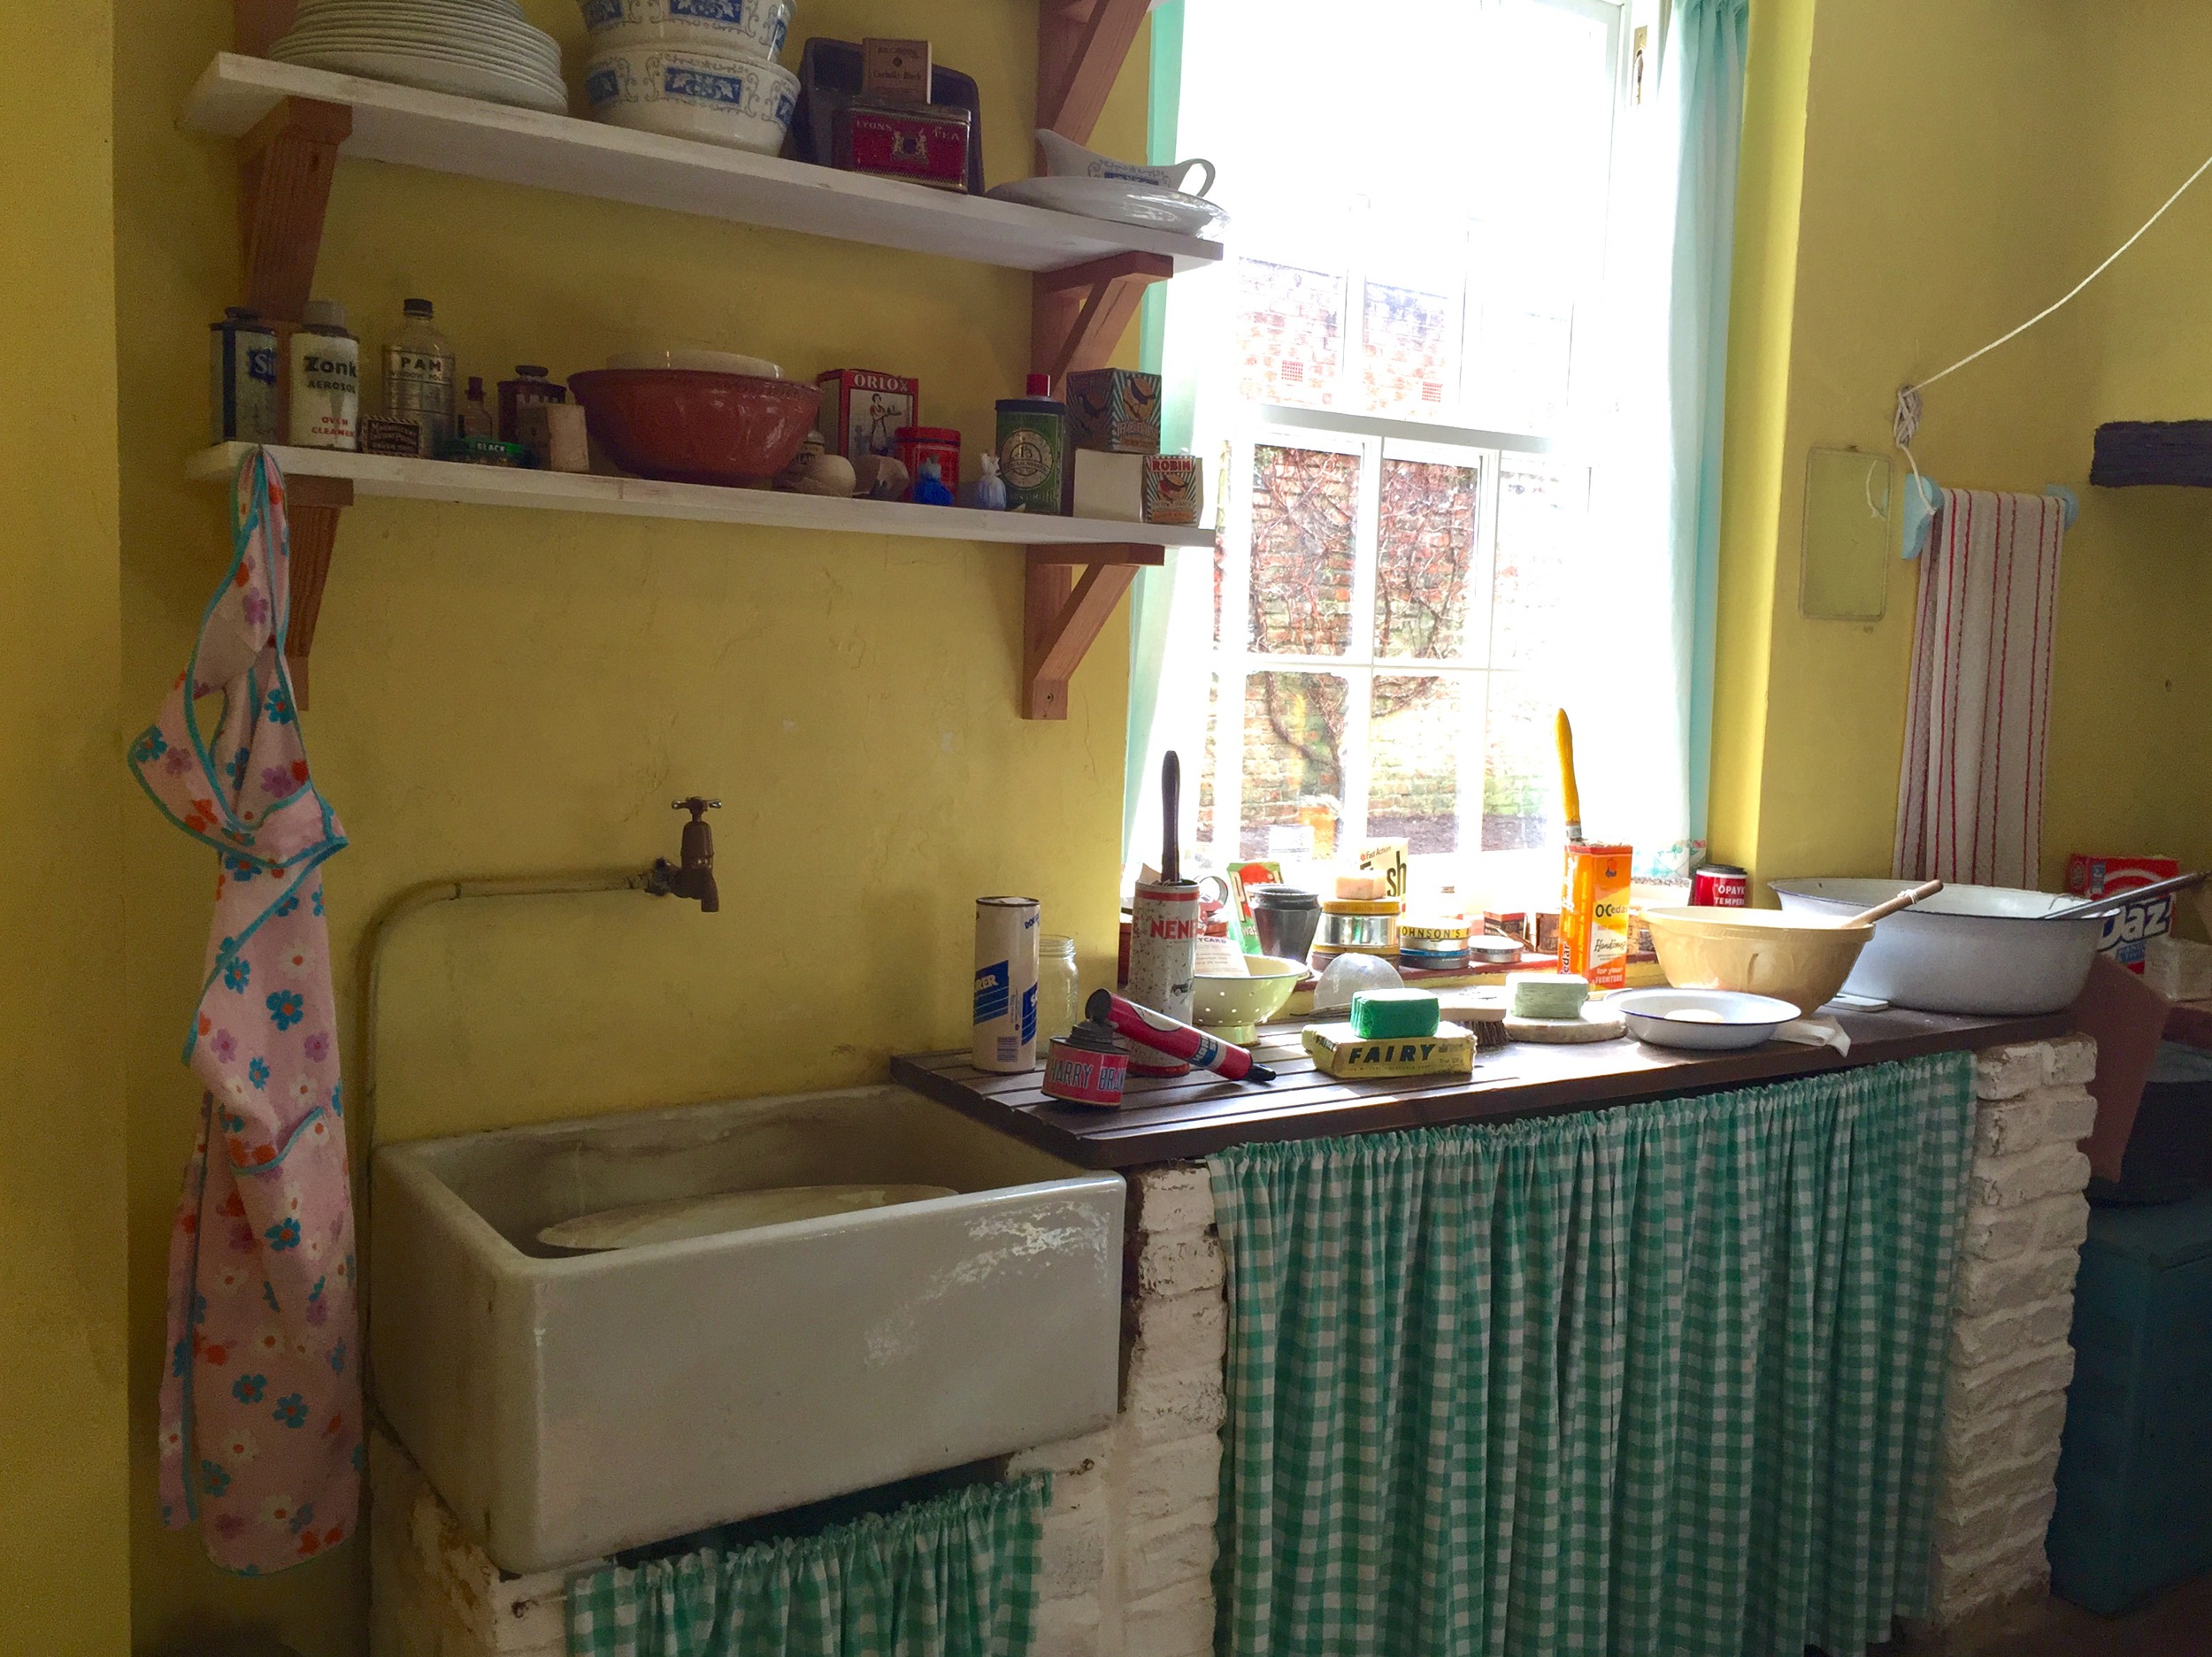 All Kitchens Great And Small The 1940 S English Farmhouse Of